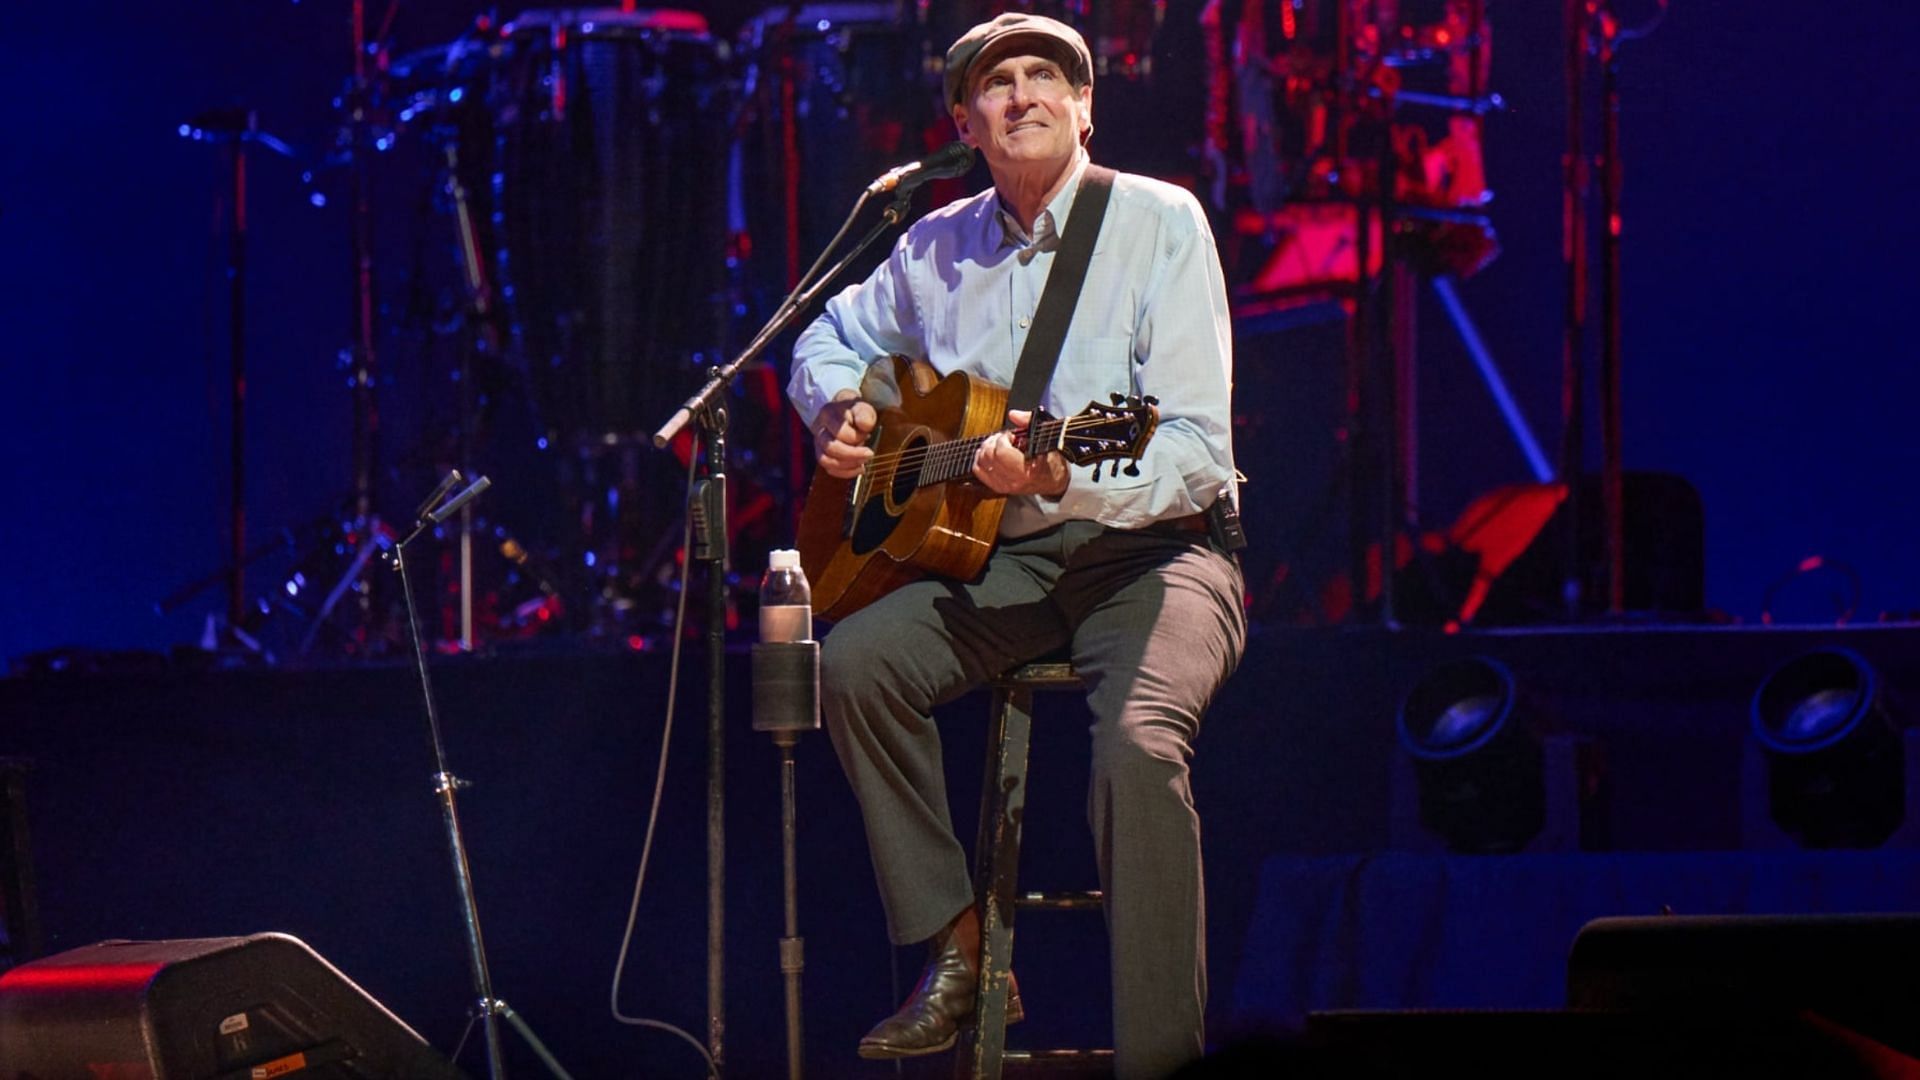 James Taylor Tour 2022 tickets Presale, where to buy, price, dates and